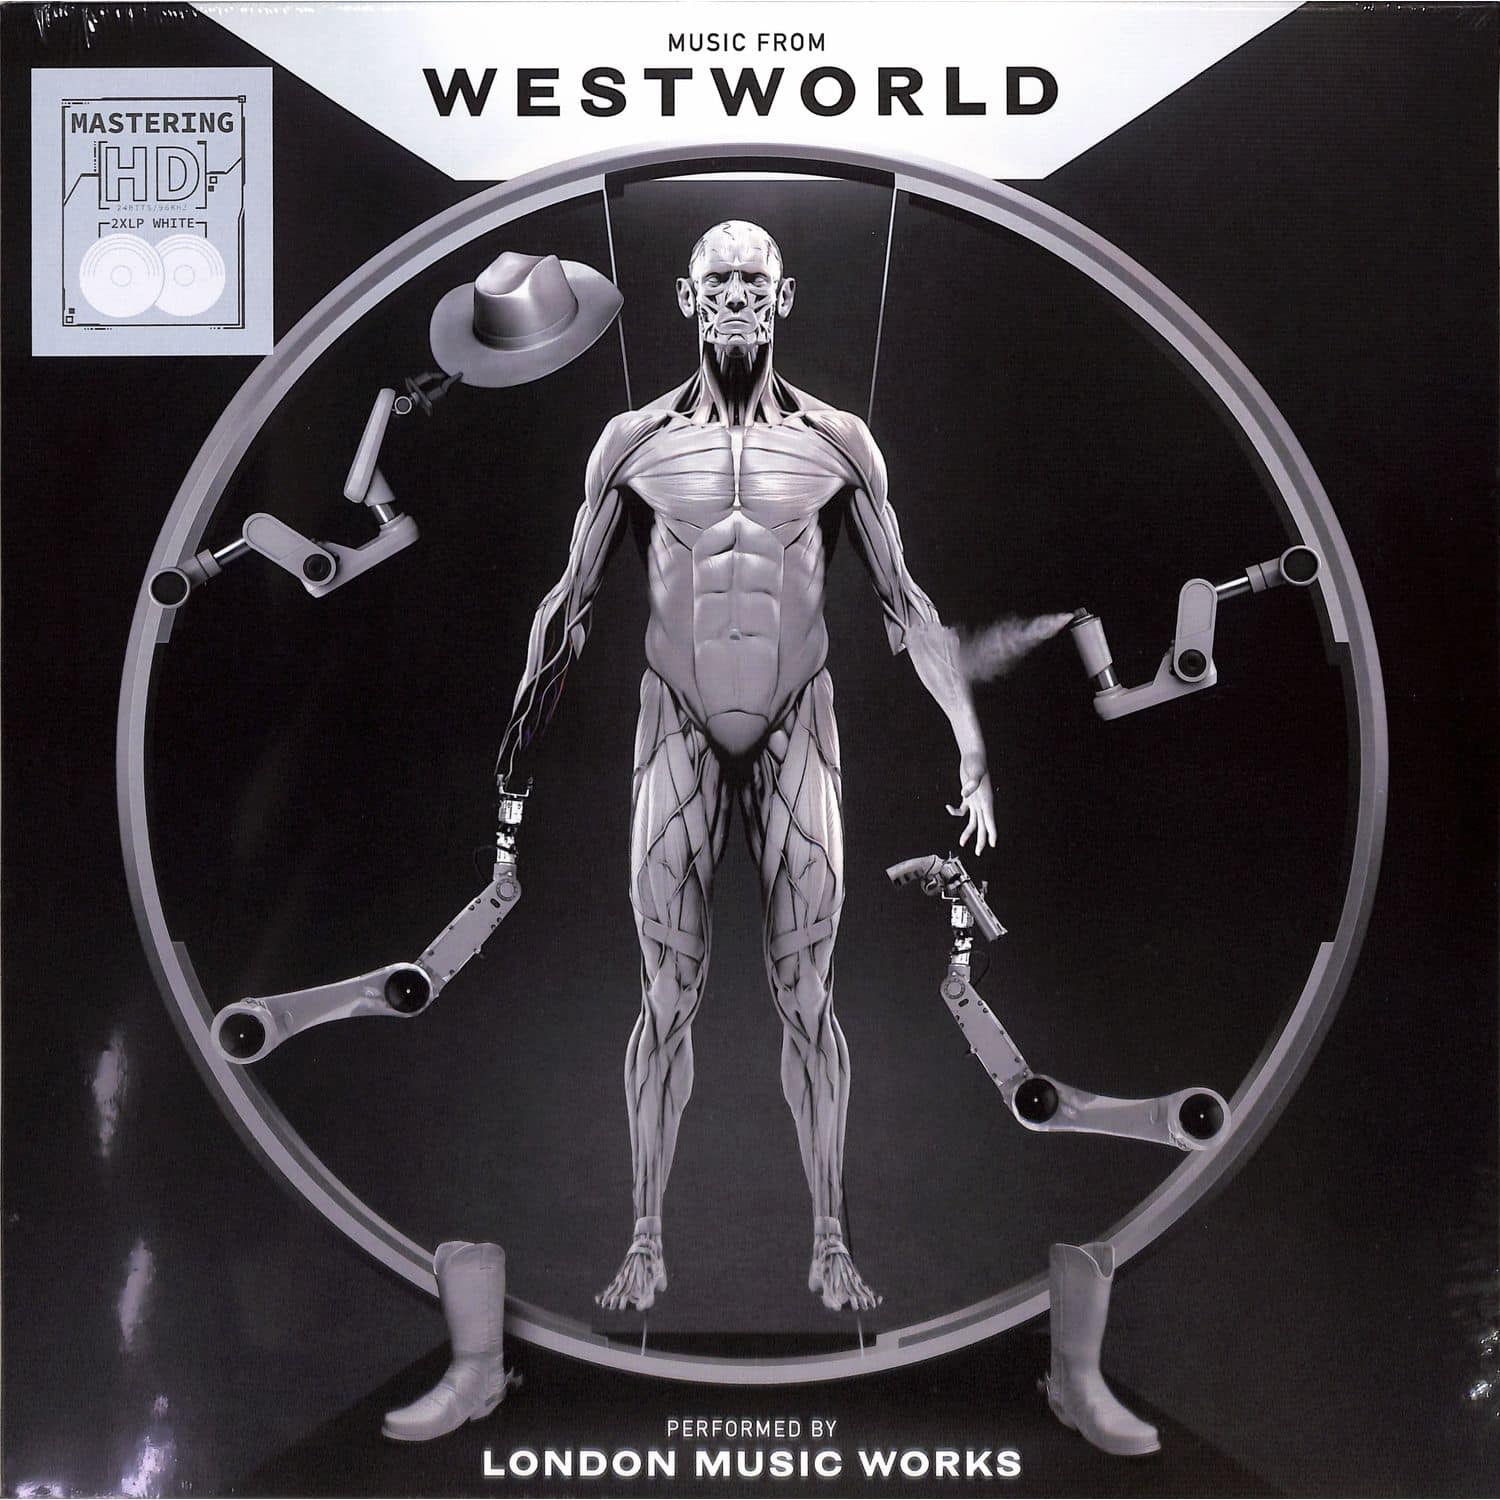 London Music Works - MUSIC FROM WESTWORLD 